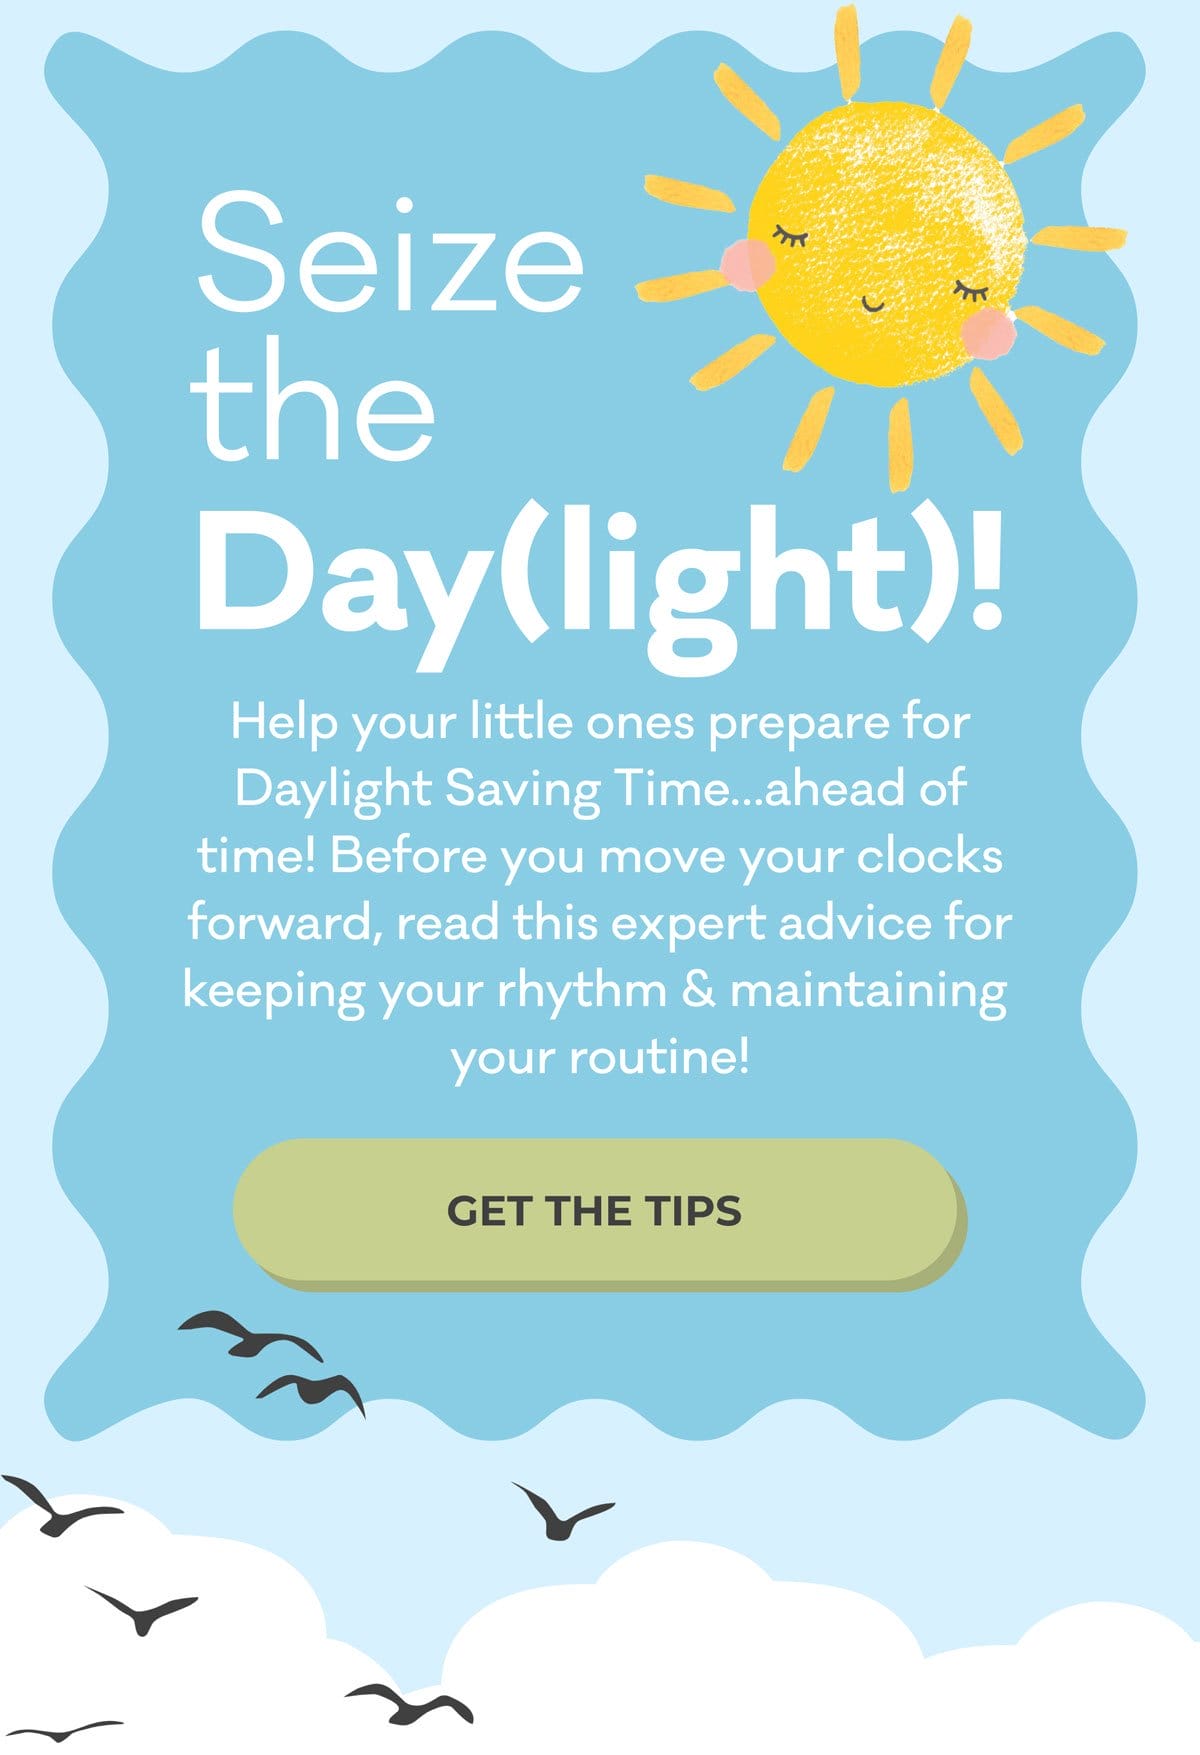 Seize the Day(light)! | Help your little ones prepare for Daylight Savings Time...ahead of time! Before you move your clocks forward, read this expert advice for keeping your rhythm & maintaining your routine! | GET THE TIPS